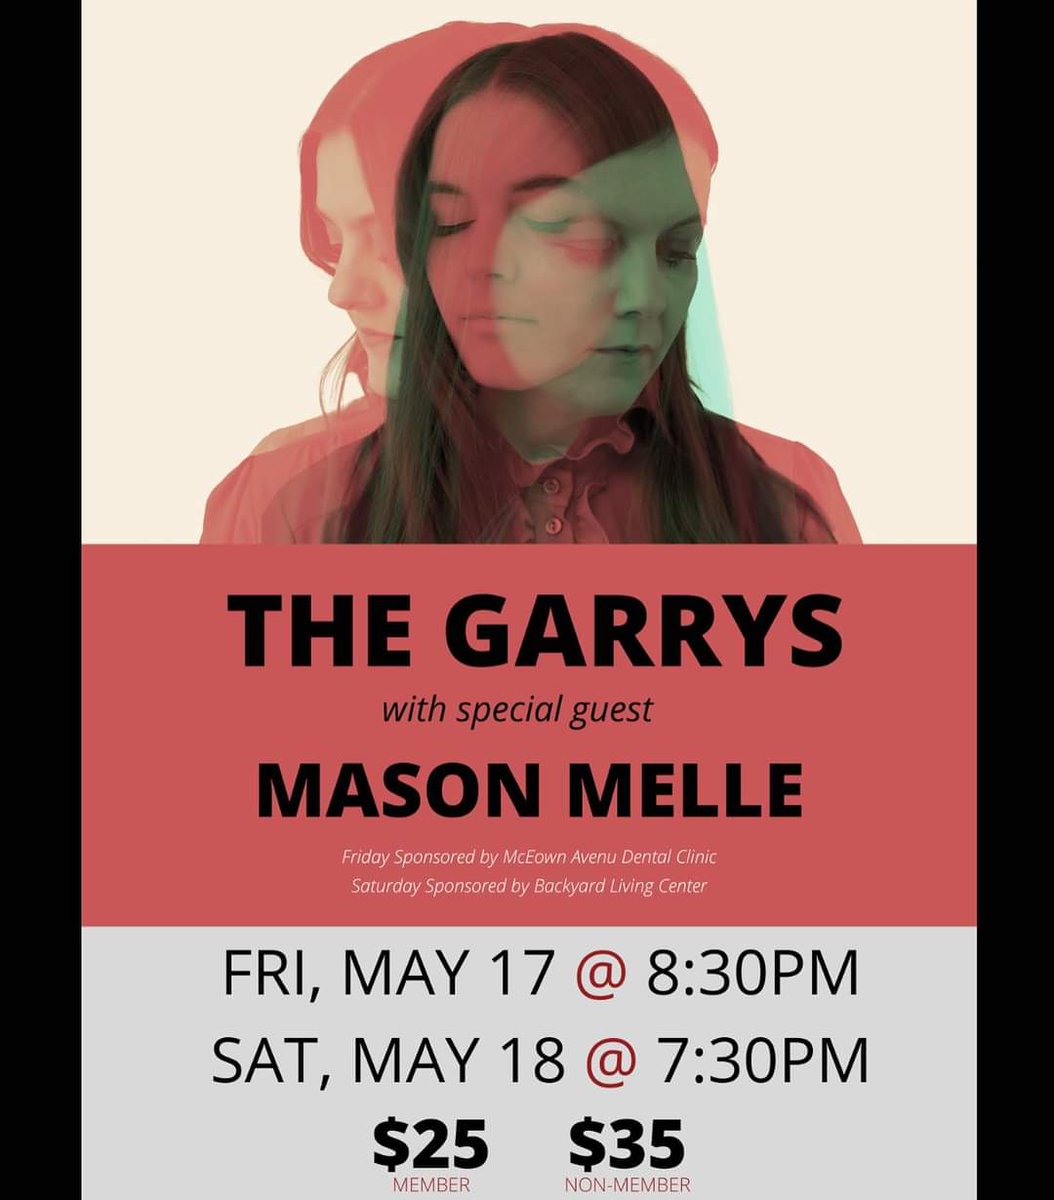 Hey Saskatoon! Another show announcement - we’re playing at @TheBassmentClub later this month with our Winnipeg pals Mason Melle! ✨ Friday, May 17 and Saturday, May 18 ✨ we’ll have some new tunes coming your way! Get your tickets at thebassment.ca 🙌 🙌